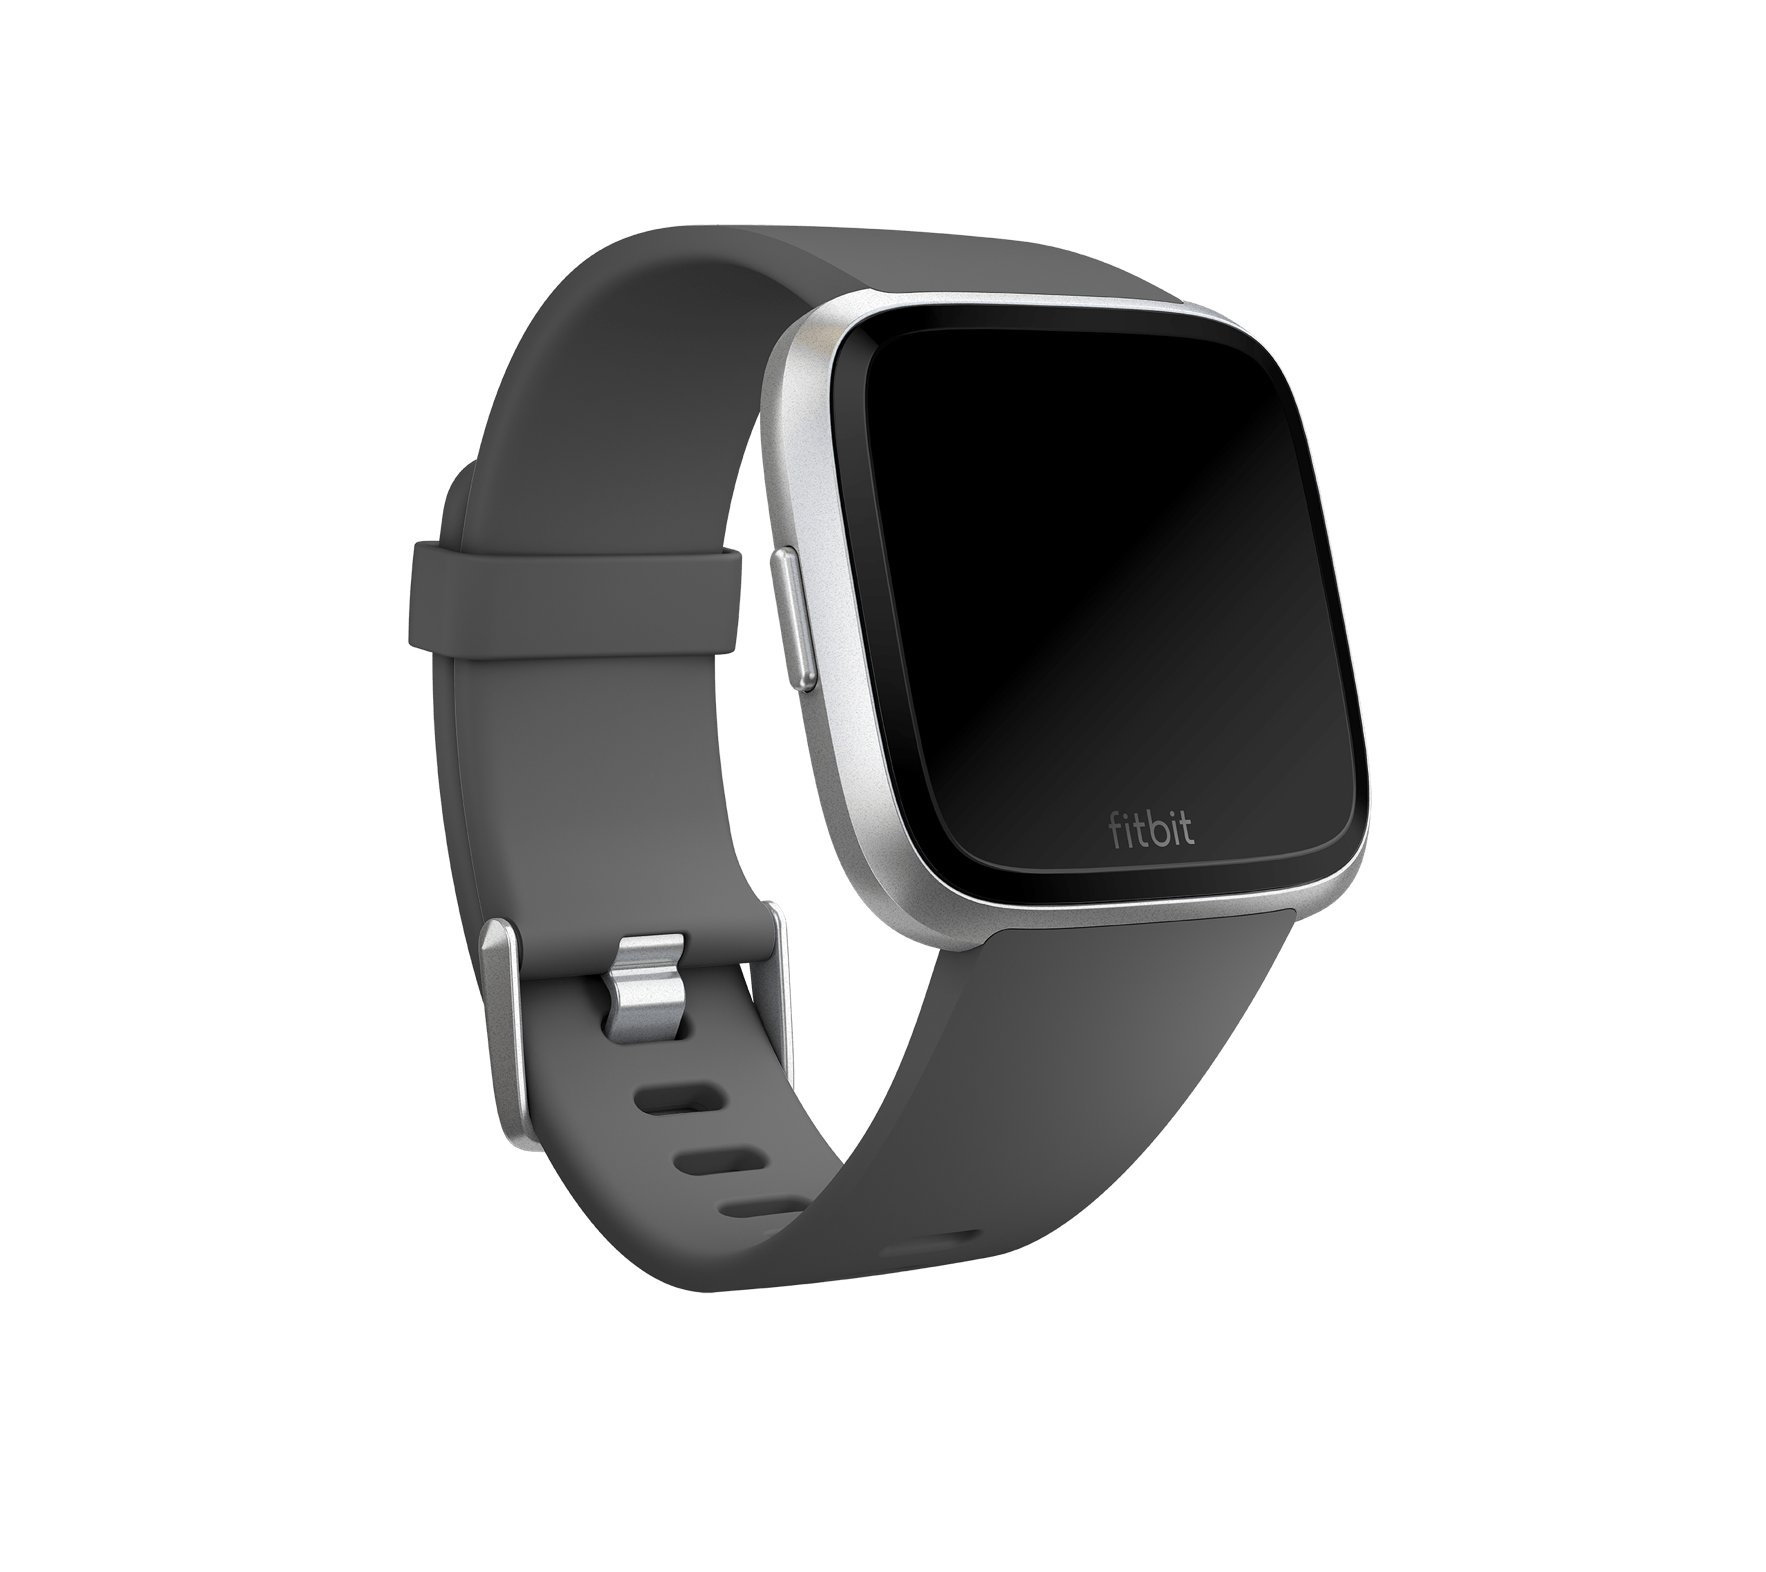 fitbit brand bands